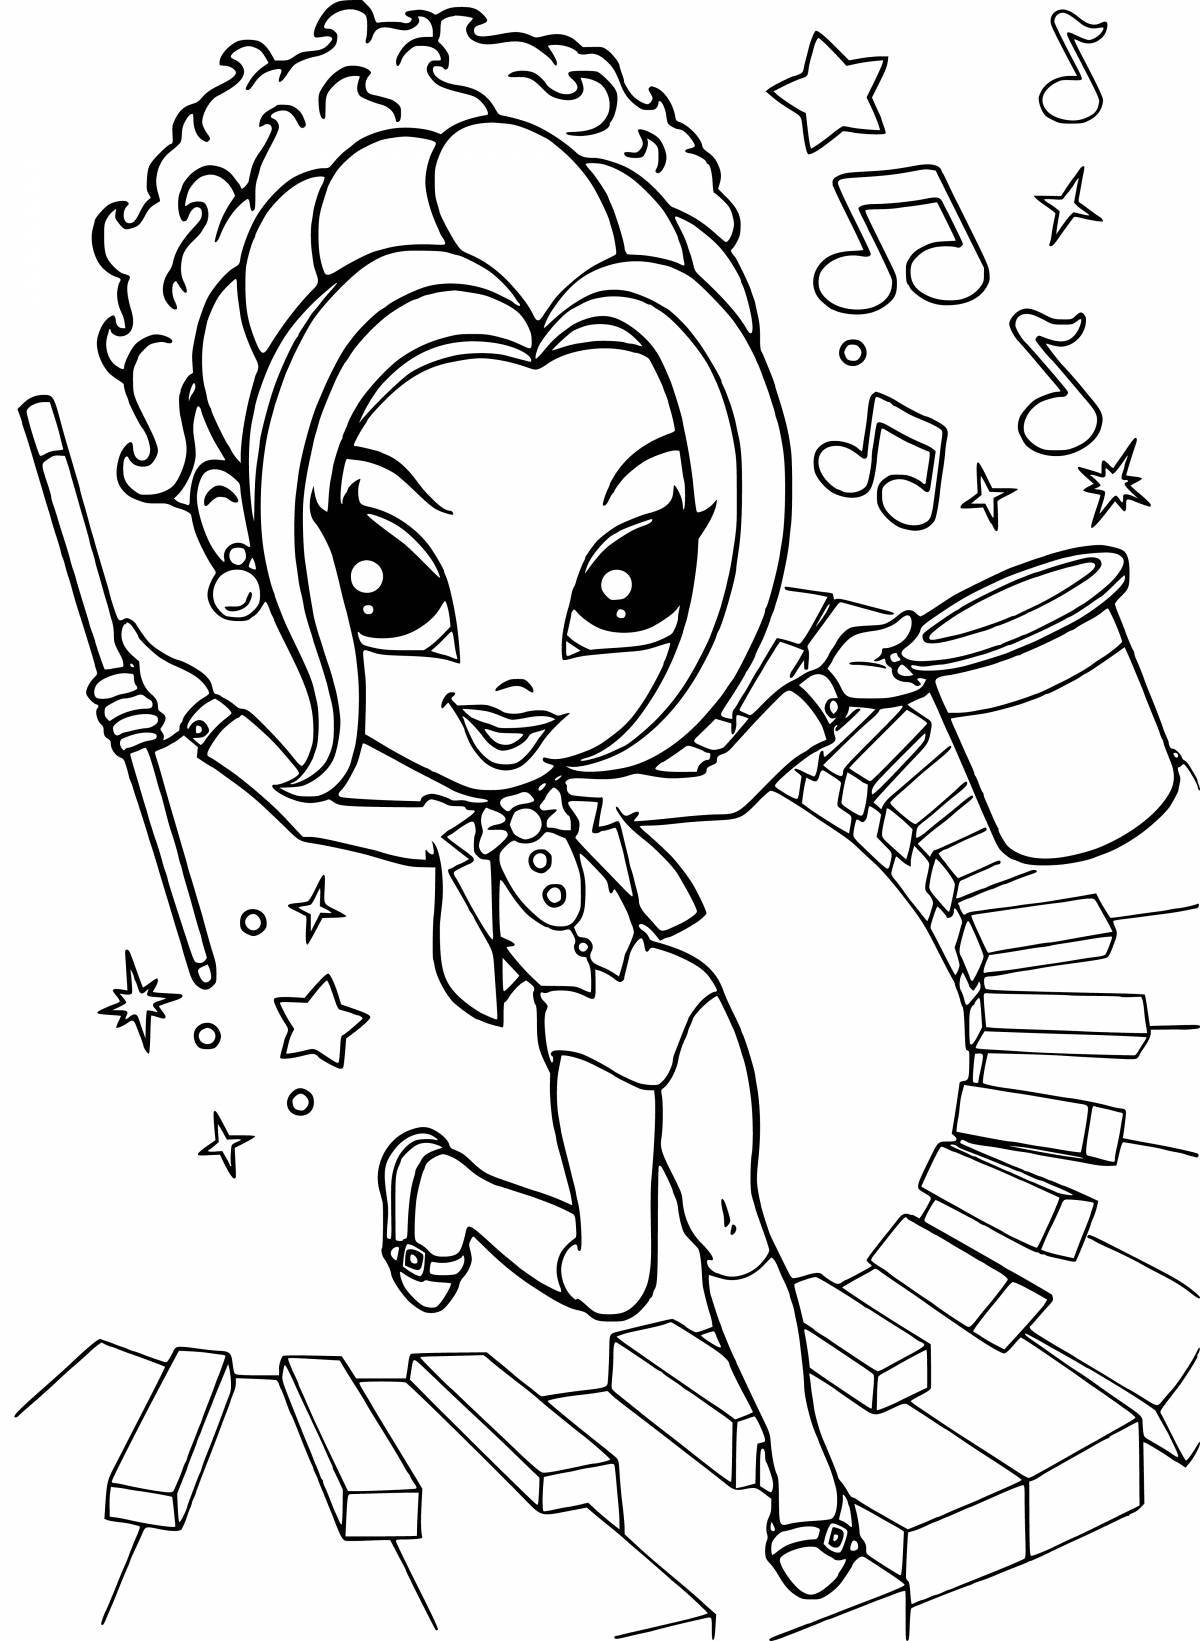 Adorable coloring page drawn